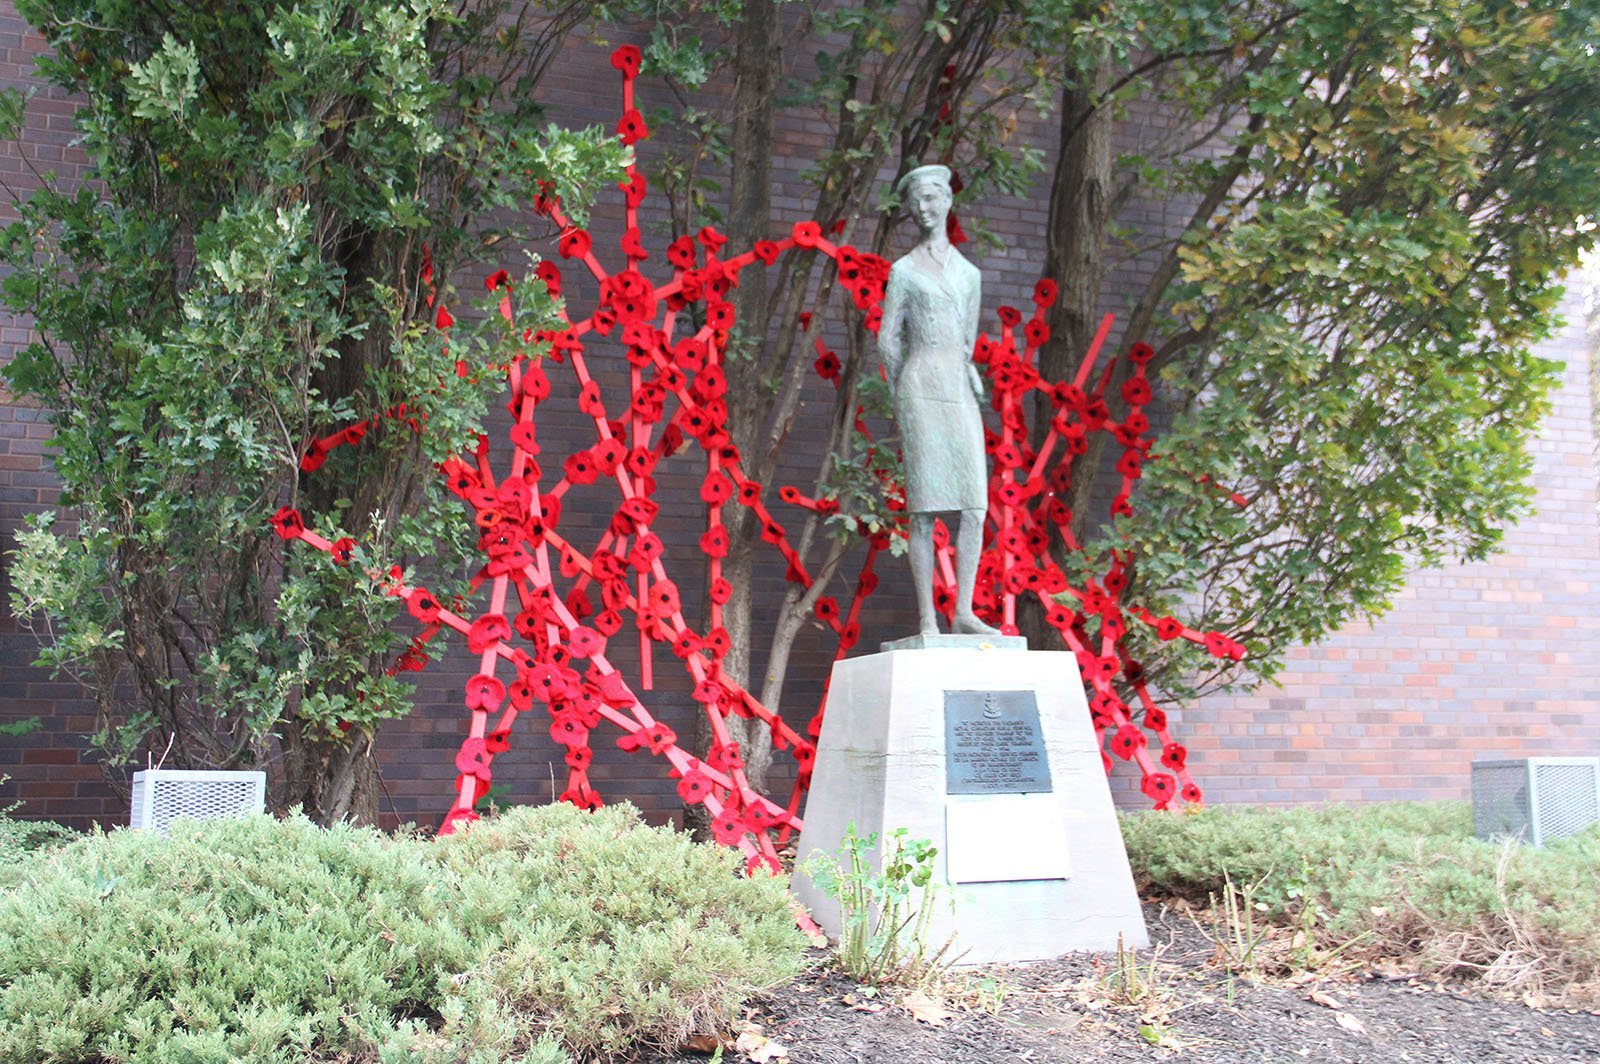 The Jenny Wren statue was one of two spots that was adorned with the Poppy Project installations on Oct. 28.